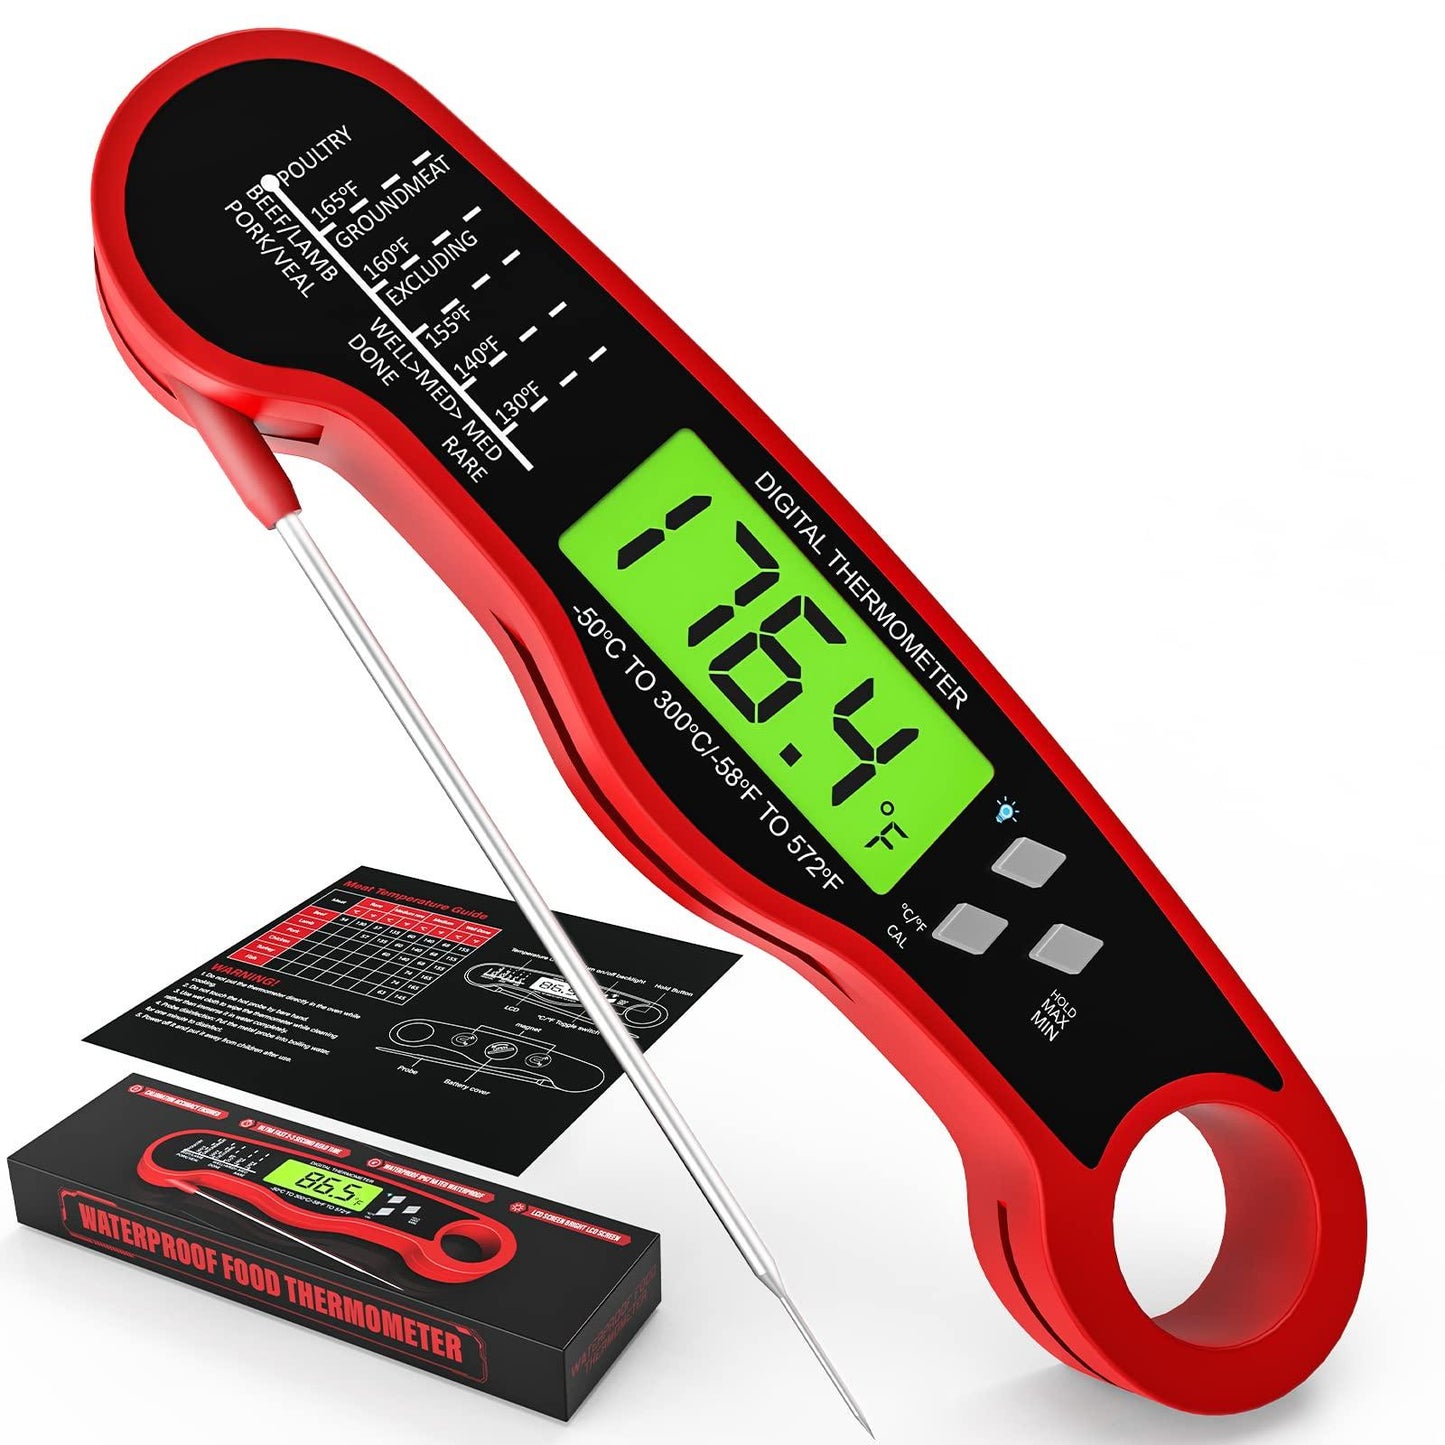 AWLKIM Meat Thermometer Digital - Fast Instant Read Food Thermometer for Cooking, Candy Making, Outside Grill, Waterproof Kitchen Thermometer with Backlight & Hold Function - Red - CookCave